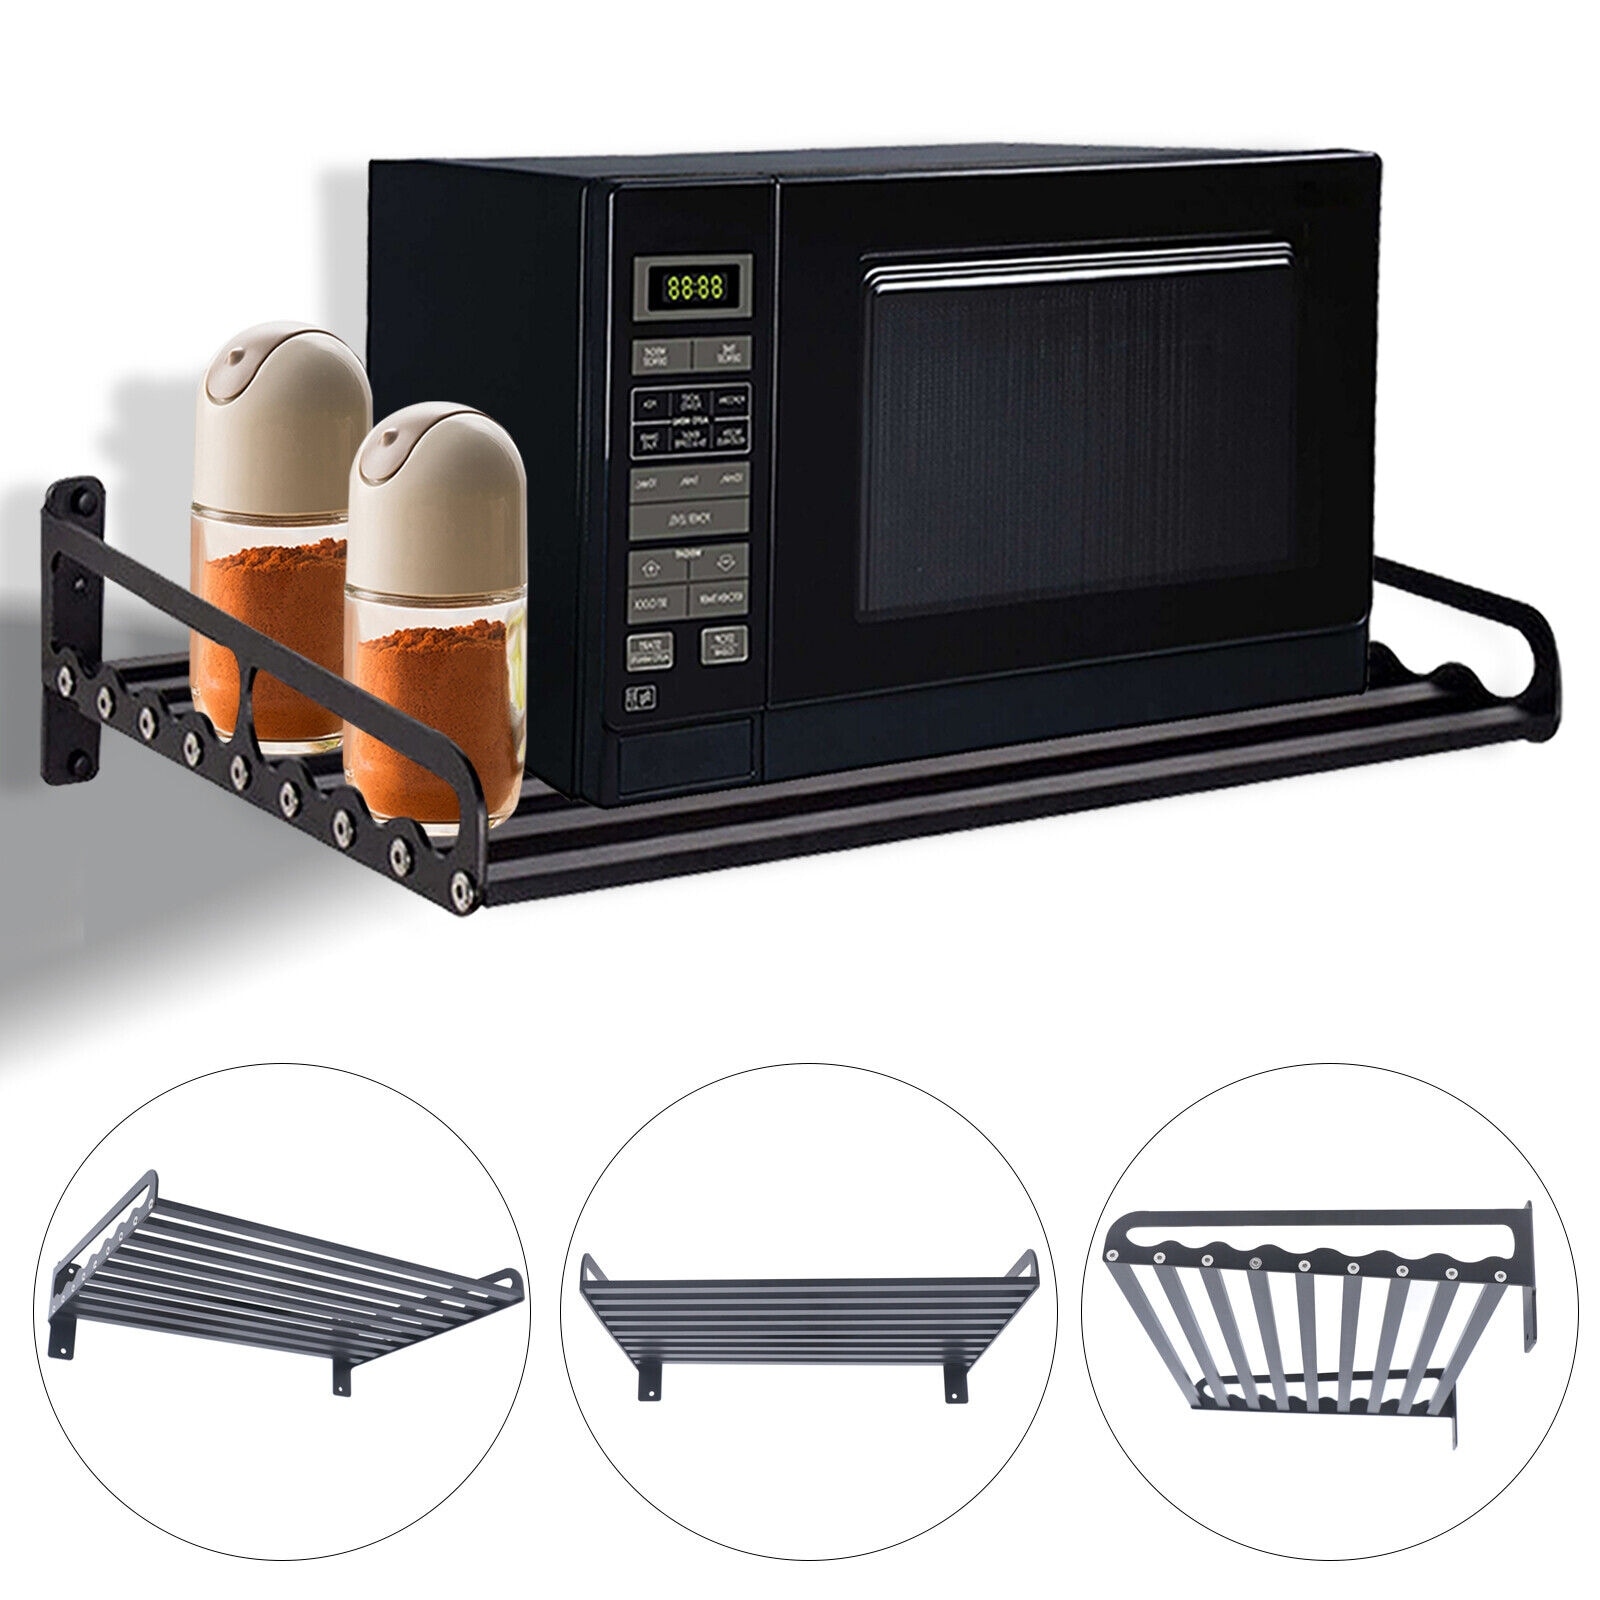 https://ak1.ostkcdn.com/images/products/is/images/direct/267d9562a281c566006bbe66abe8d15a2f717696/Wall-Mounted-Microwave-Oven-Rack-Kitchen-Bakers-Rack-Space-Saving.jpg